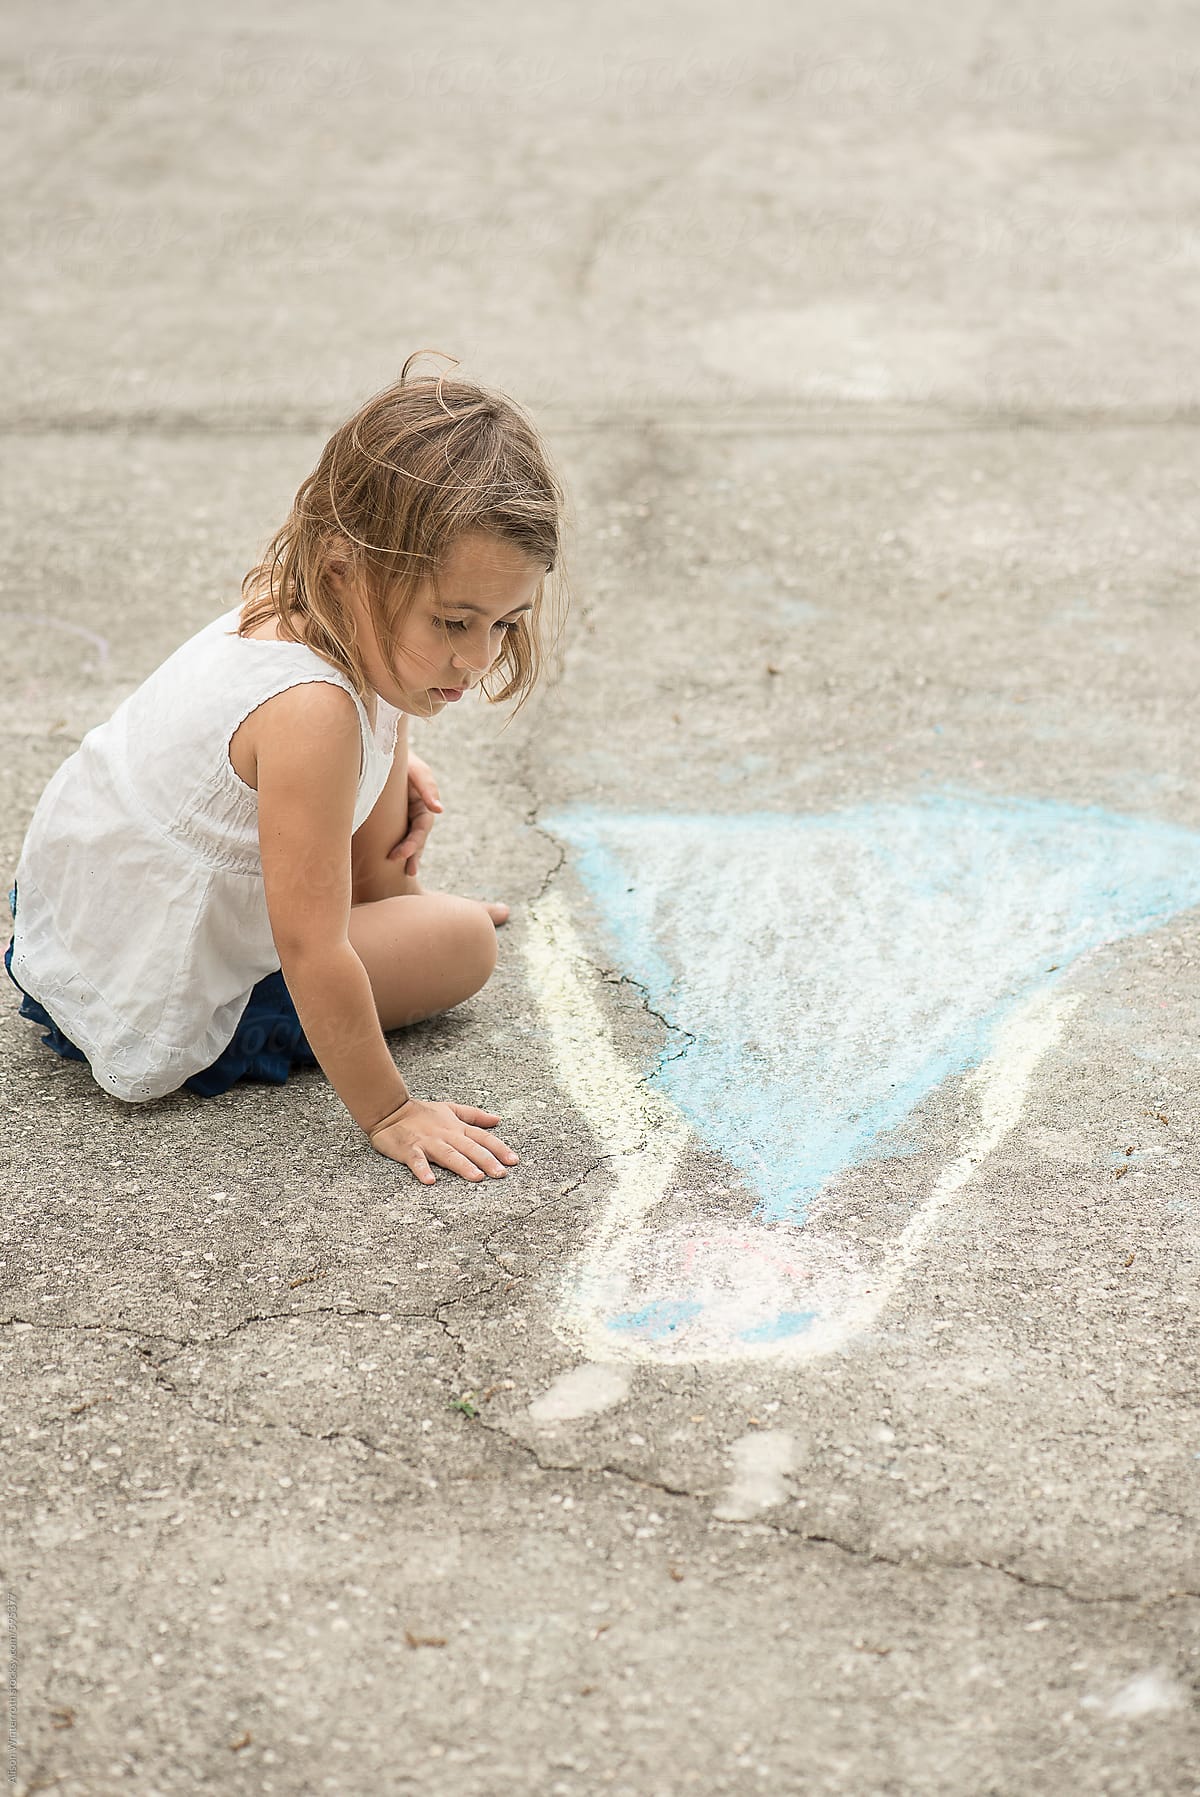 A Girl Looks At Her Chalk Drawing